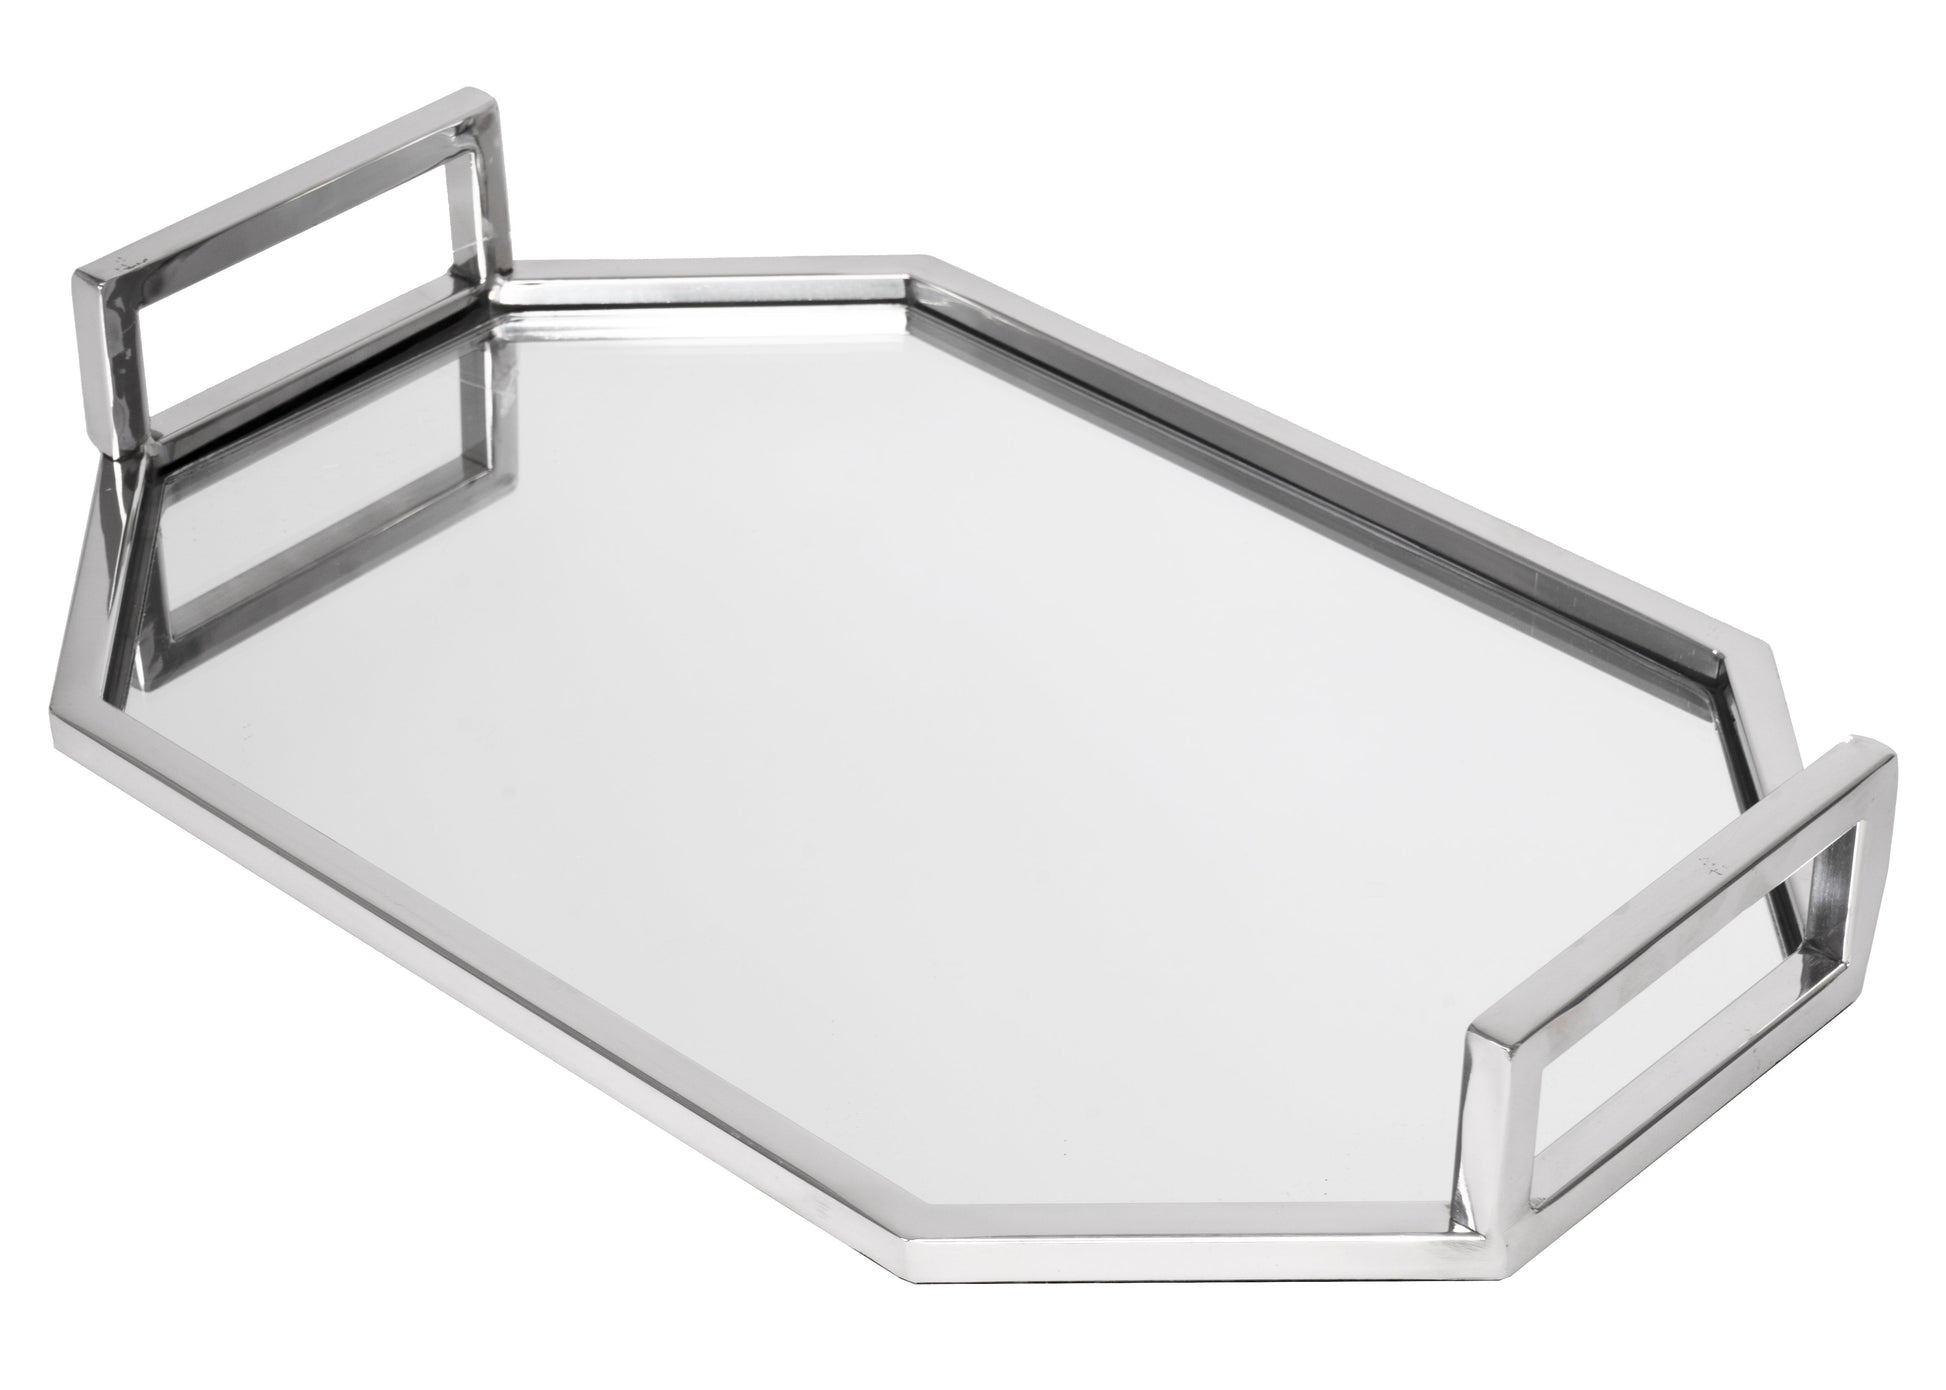 Mirror & Stainless Steel Accent Tray - Expo Home Decor